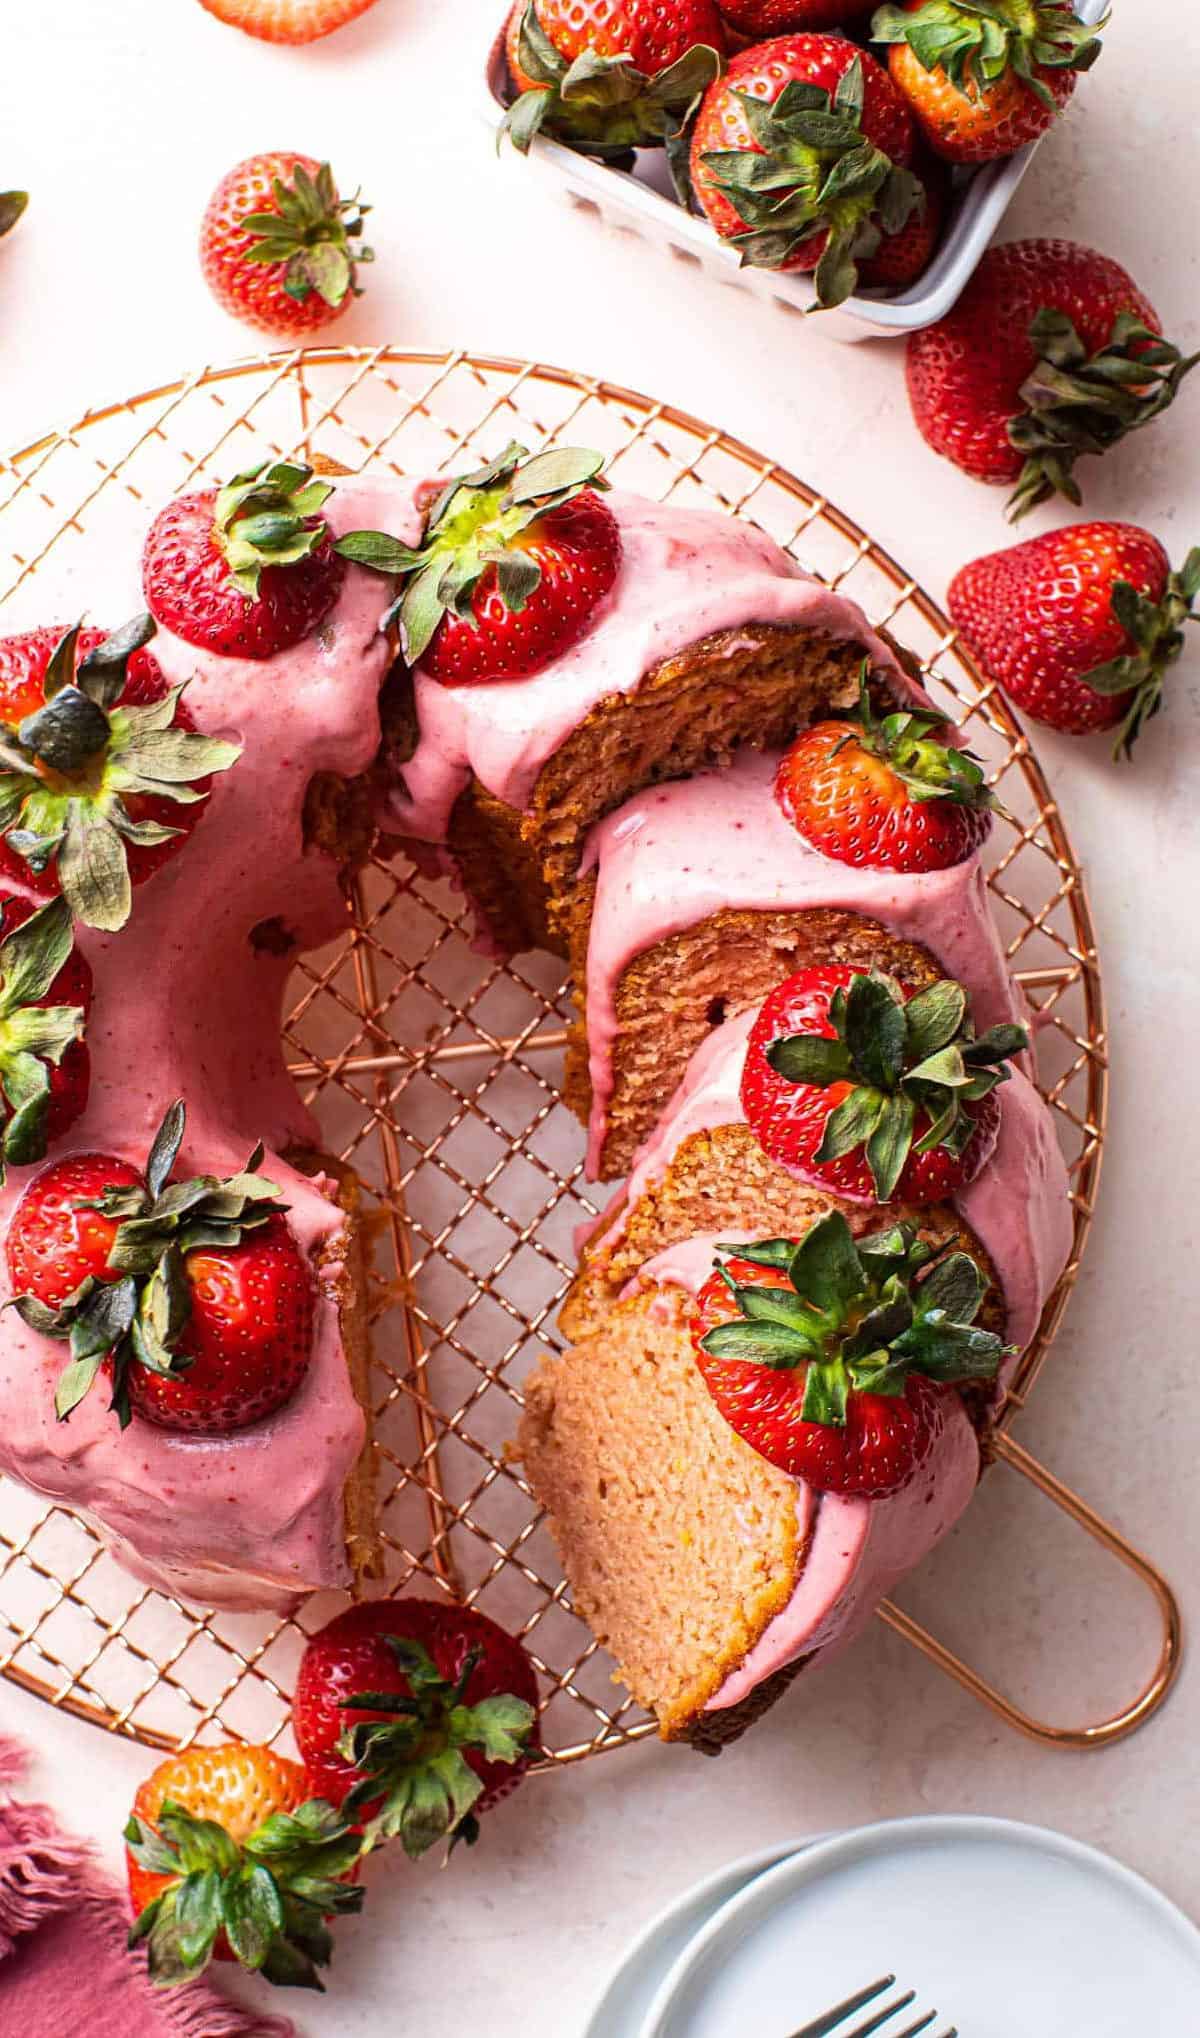  Behold, the perfect treat for strawberry lovers!